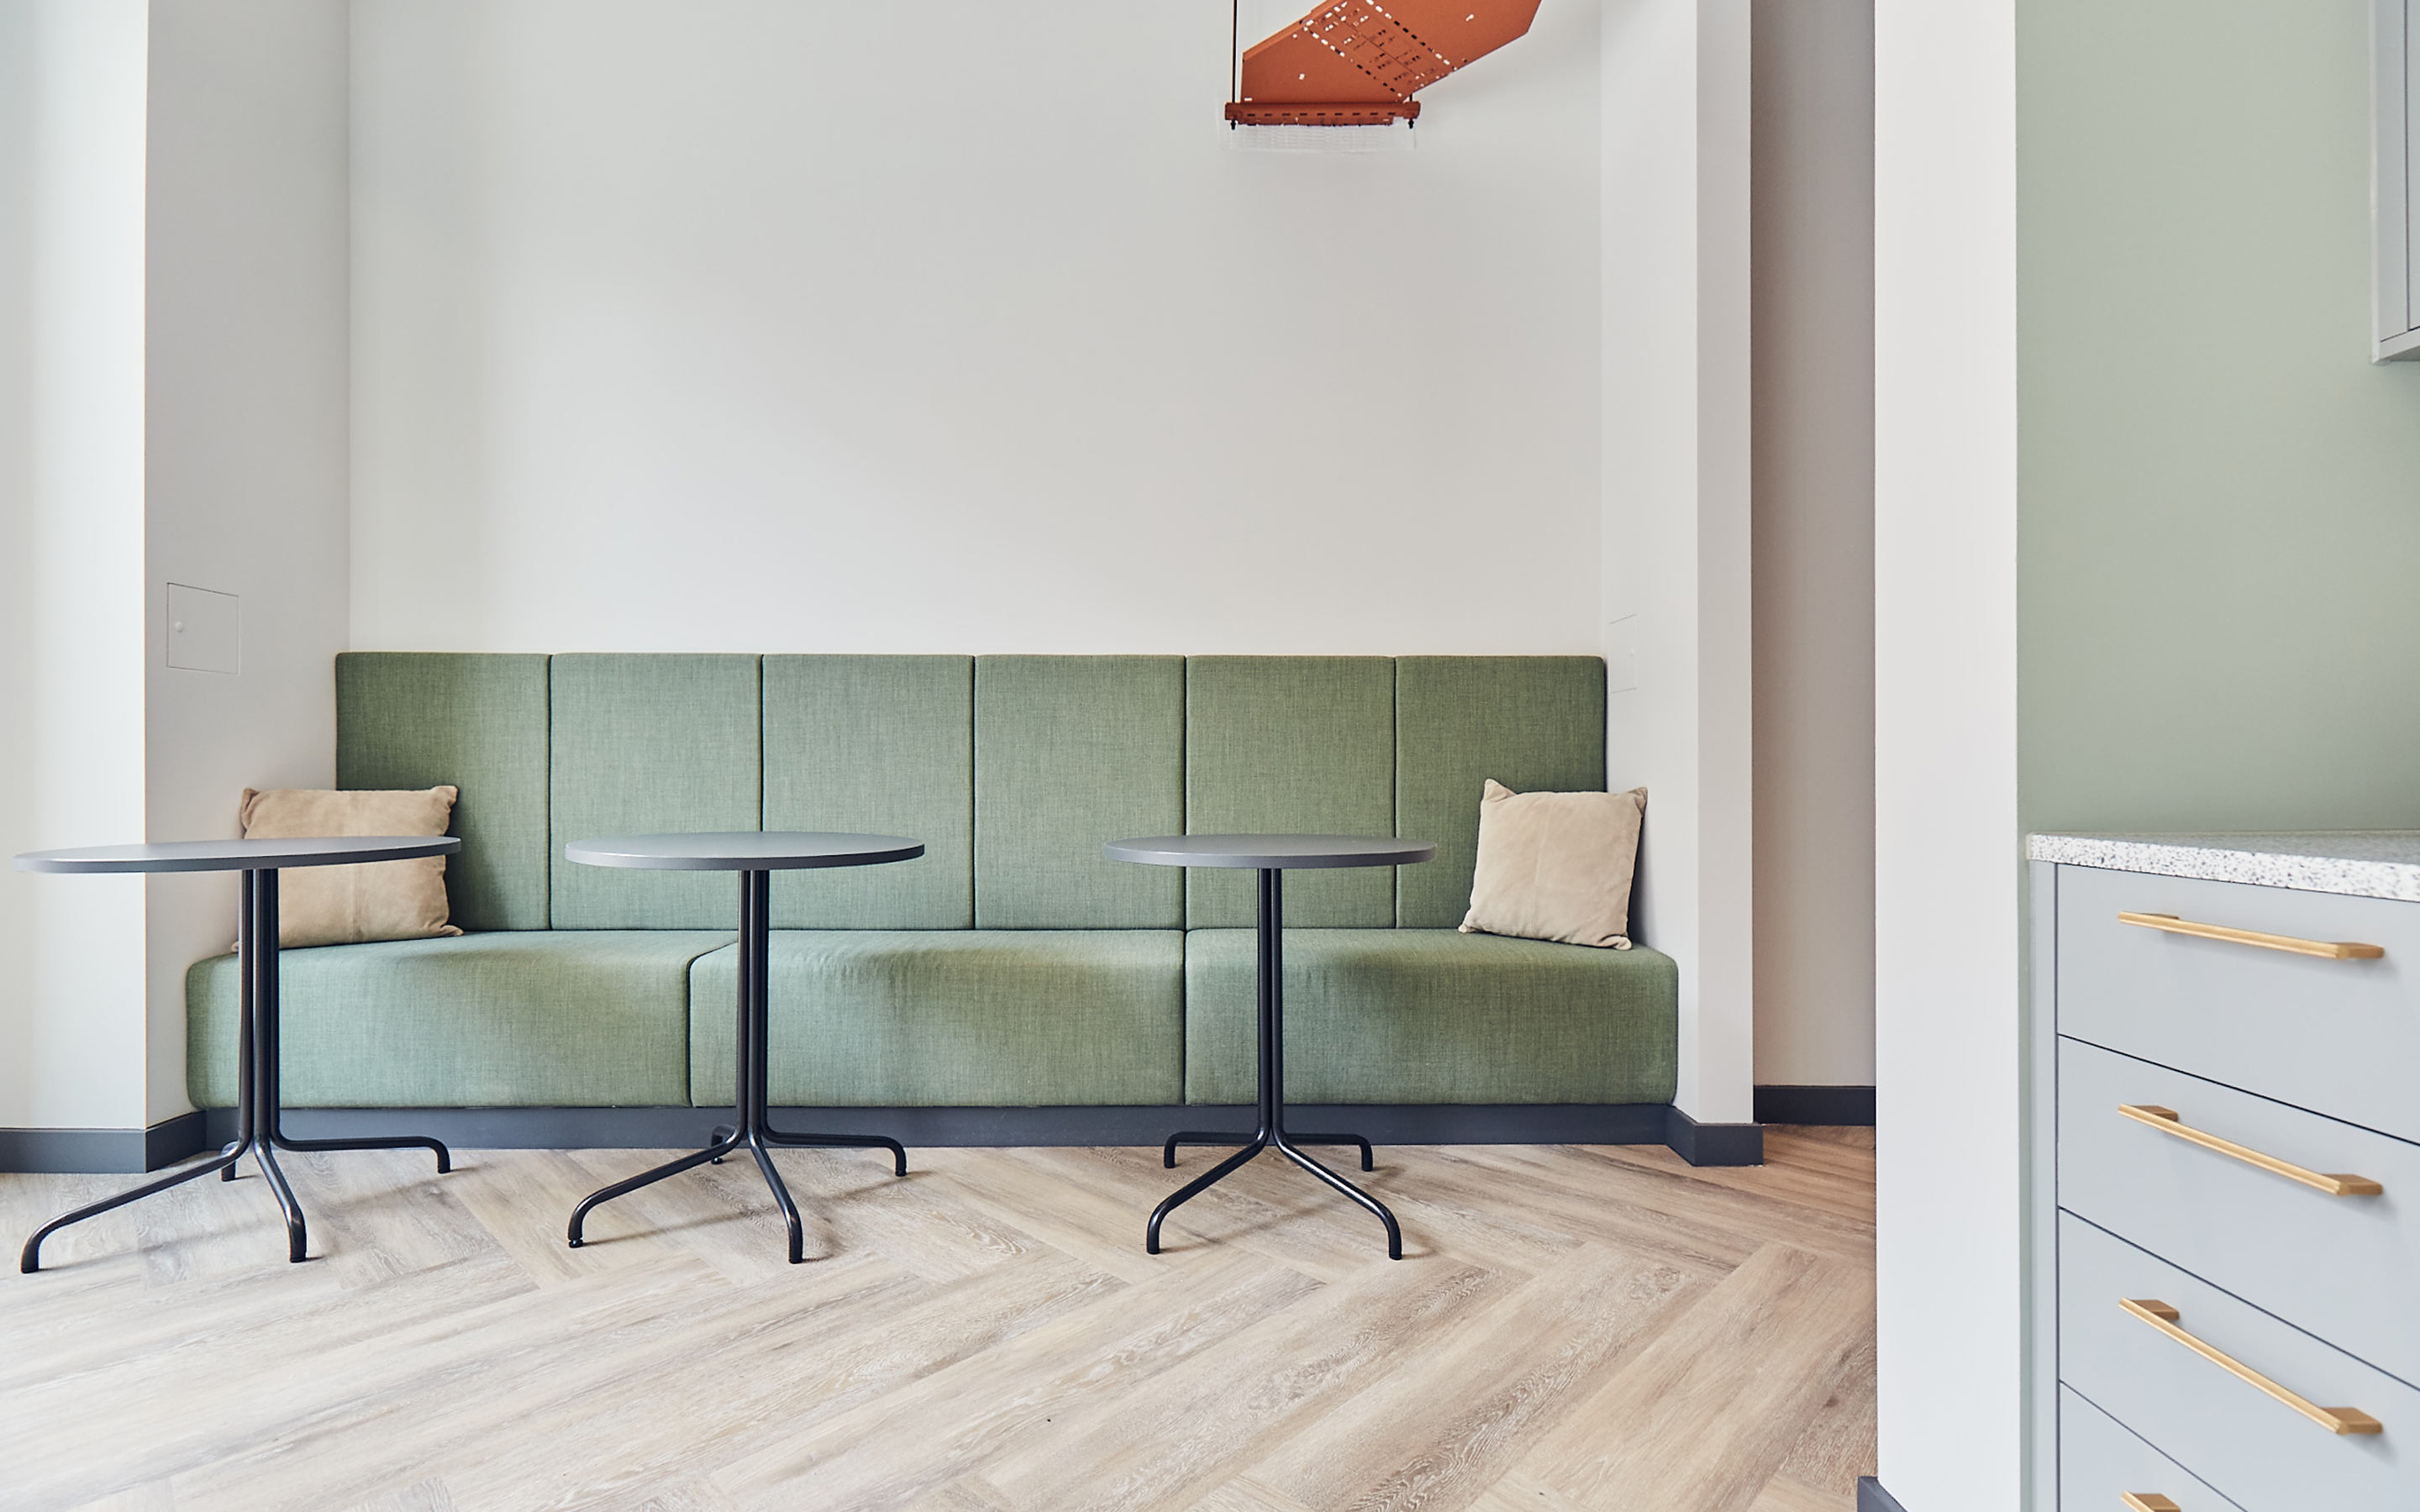 The image shows soft green banquette seating and laptop tables in an office tea point